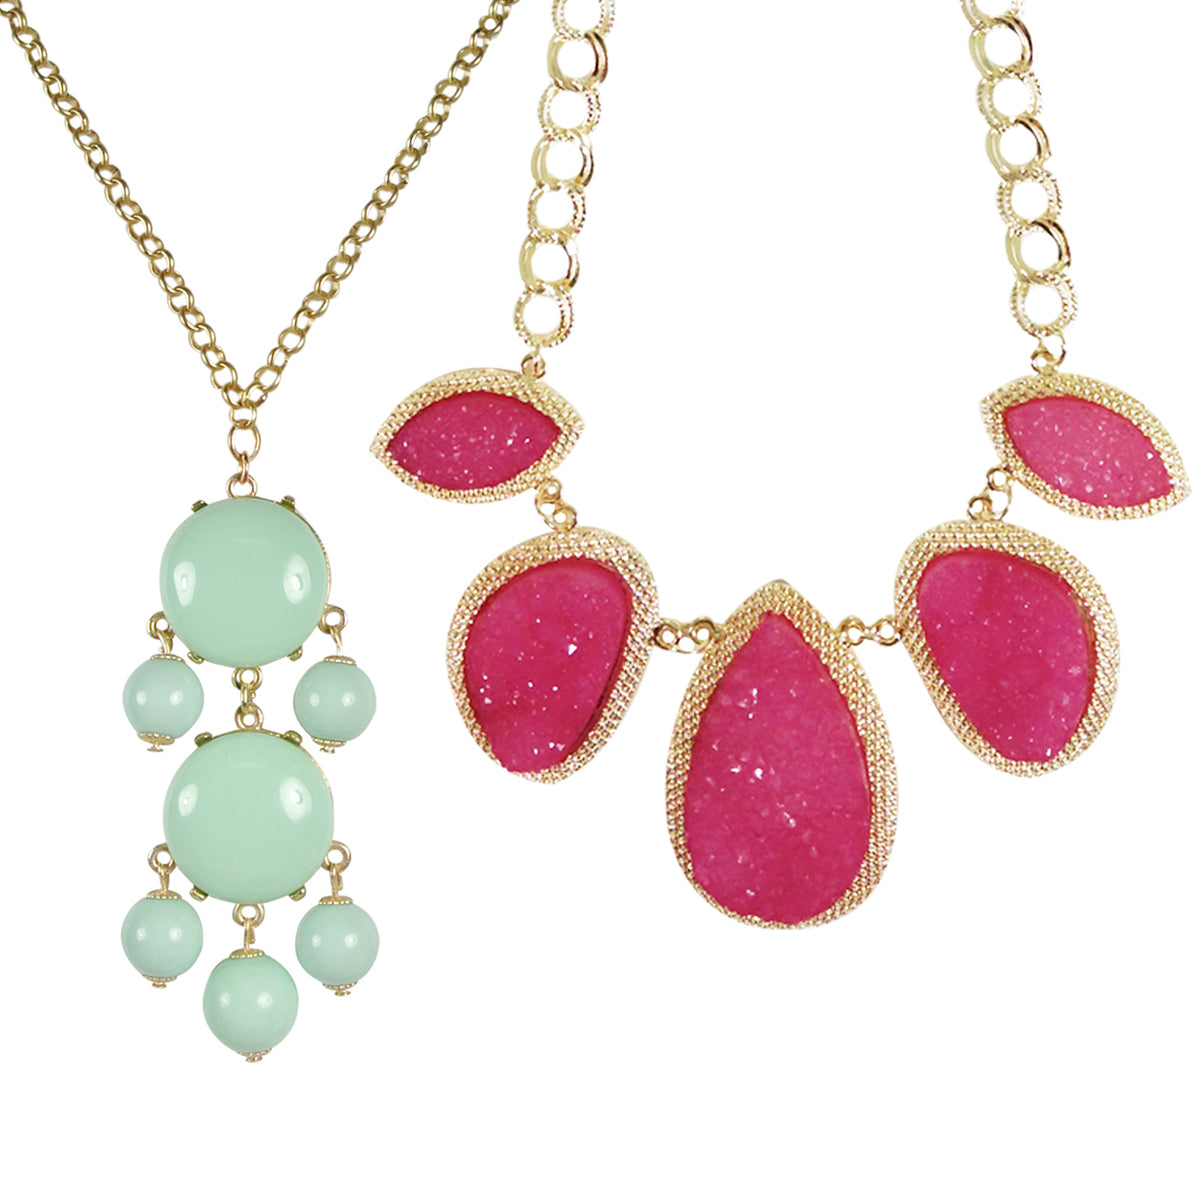 Mint Green Beaded Bubble Pendant Necklace + Pink Drop Stone Necklace [A63876, A64560]